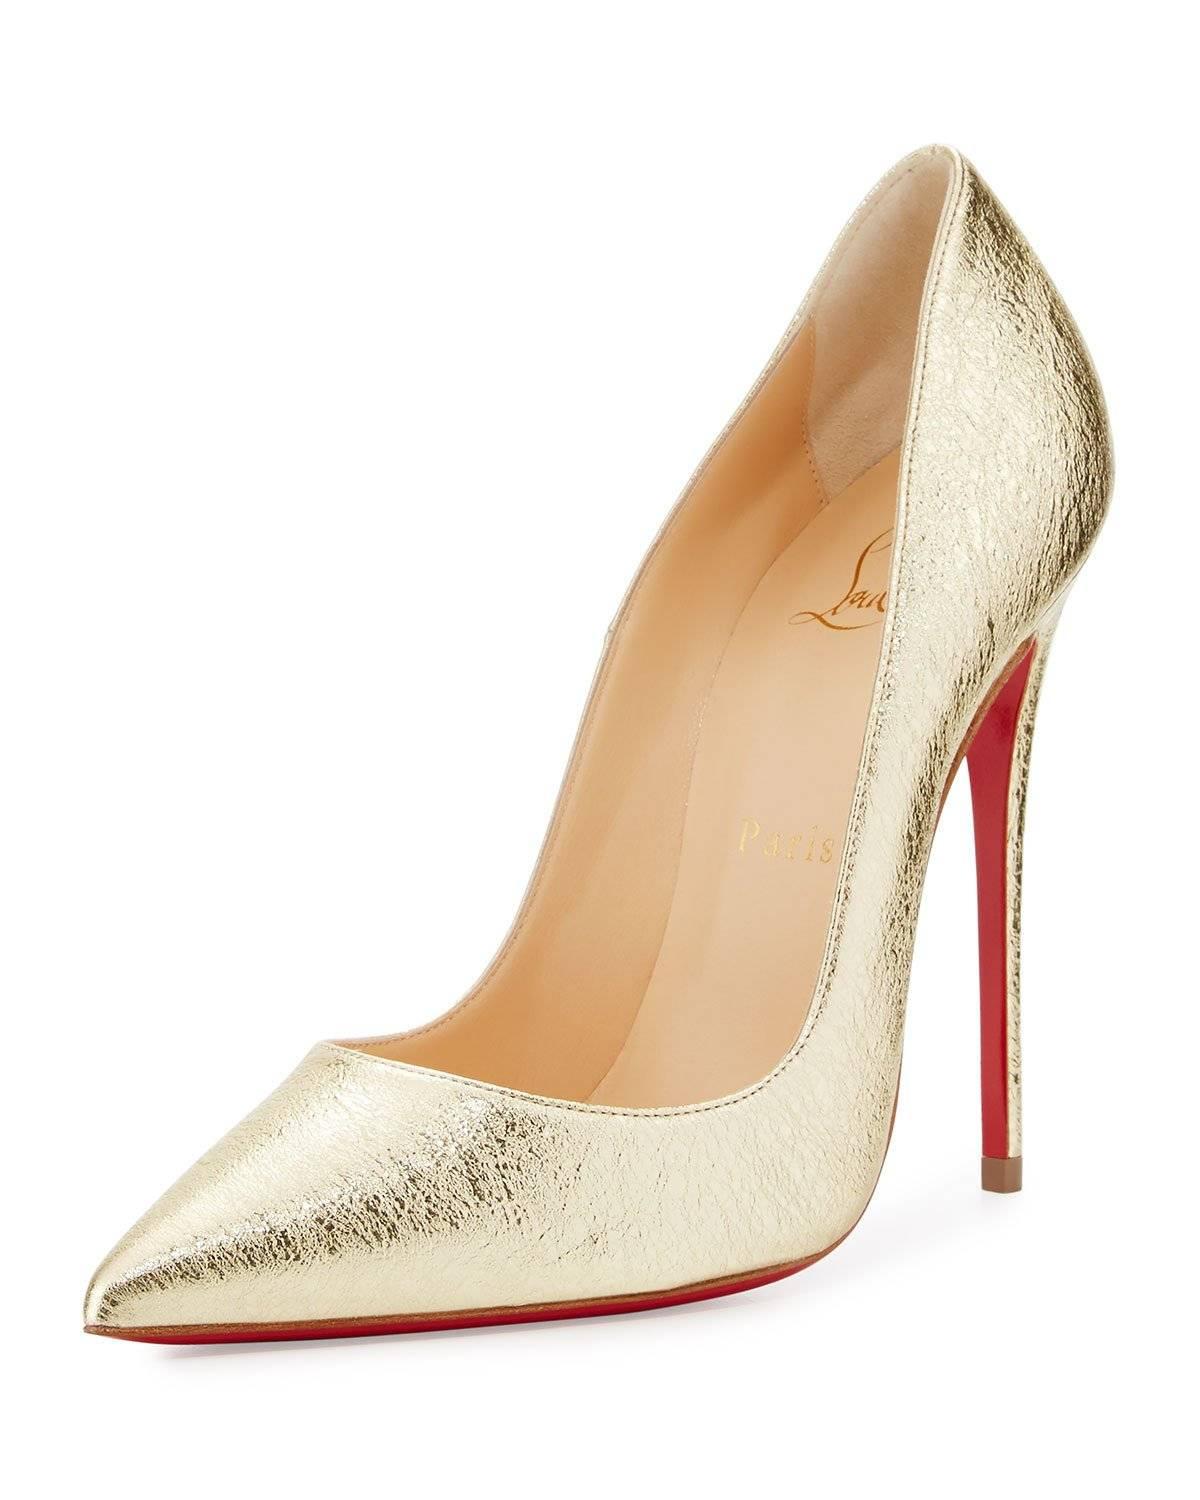 CURATOR'S NOTES

Christian Louboutin New Light Gold Leather So Kate Evening Heels Pumps in Box  

Size IT 36.5
Leather
Slip on 
Made in Italy
Heel height 4.75"
Includes original Christian Louboutin dust bag and box 